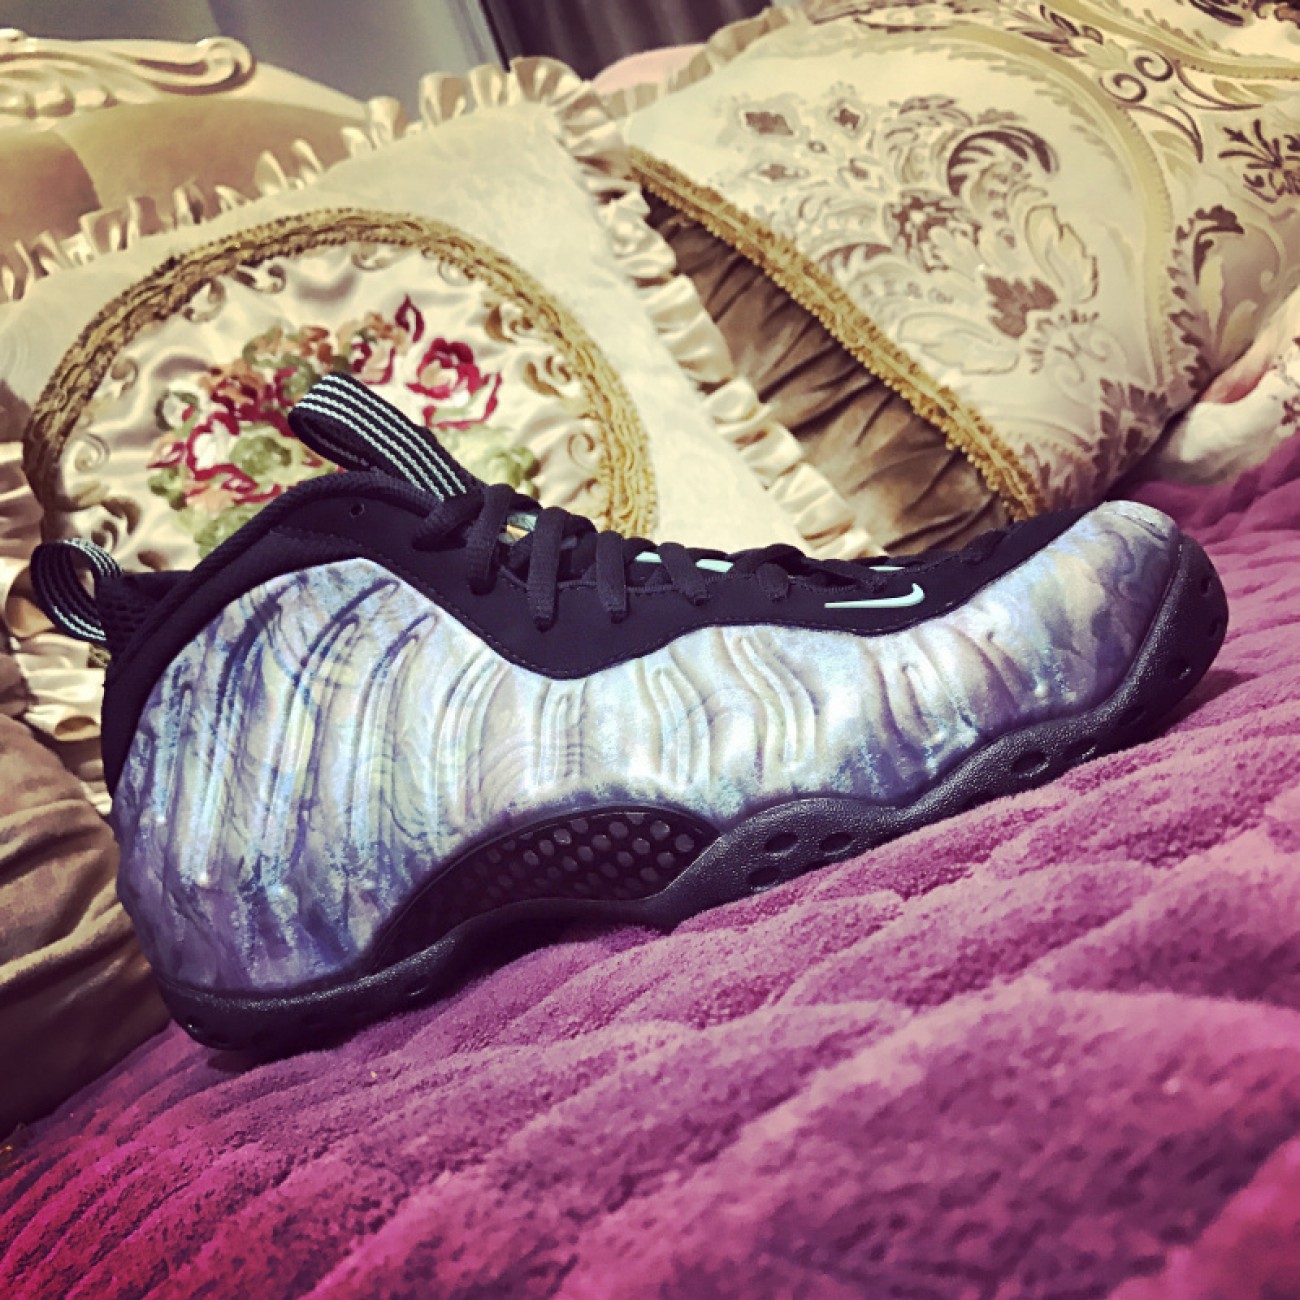 Nike Air Foamposite One PRM "Abalone" 575420-009